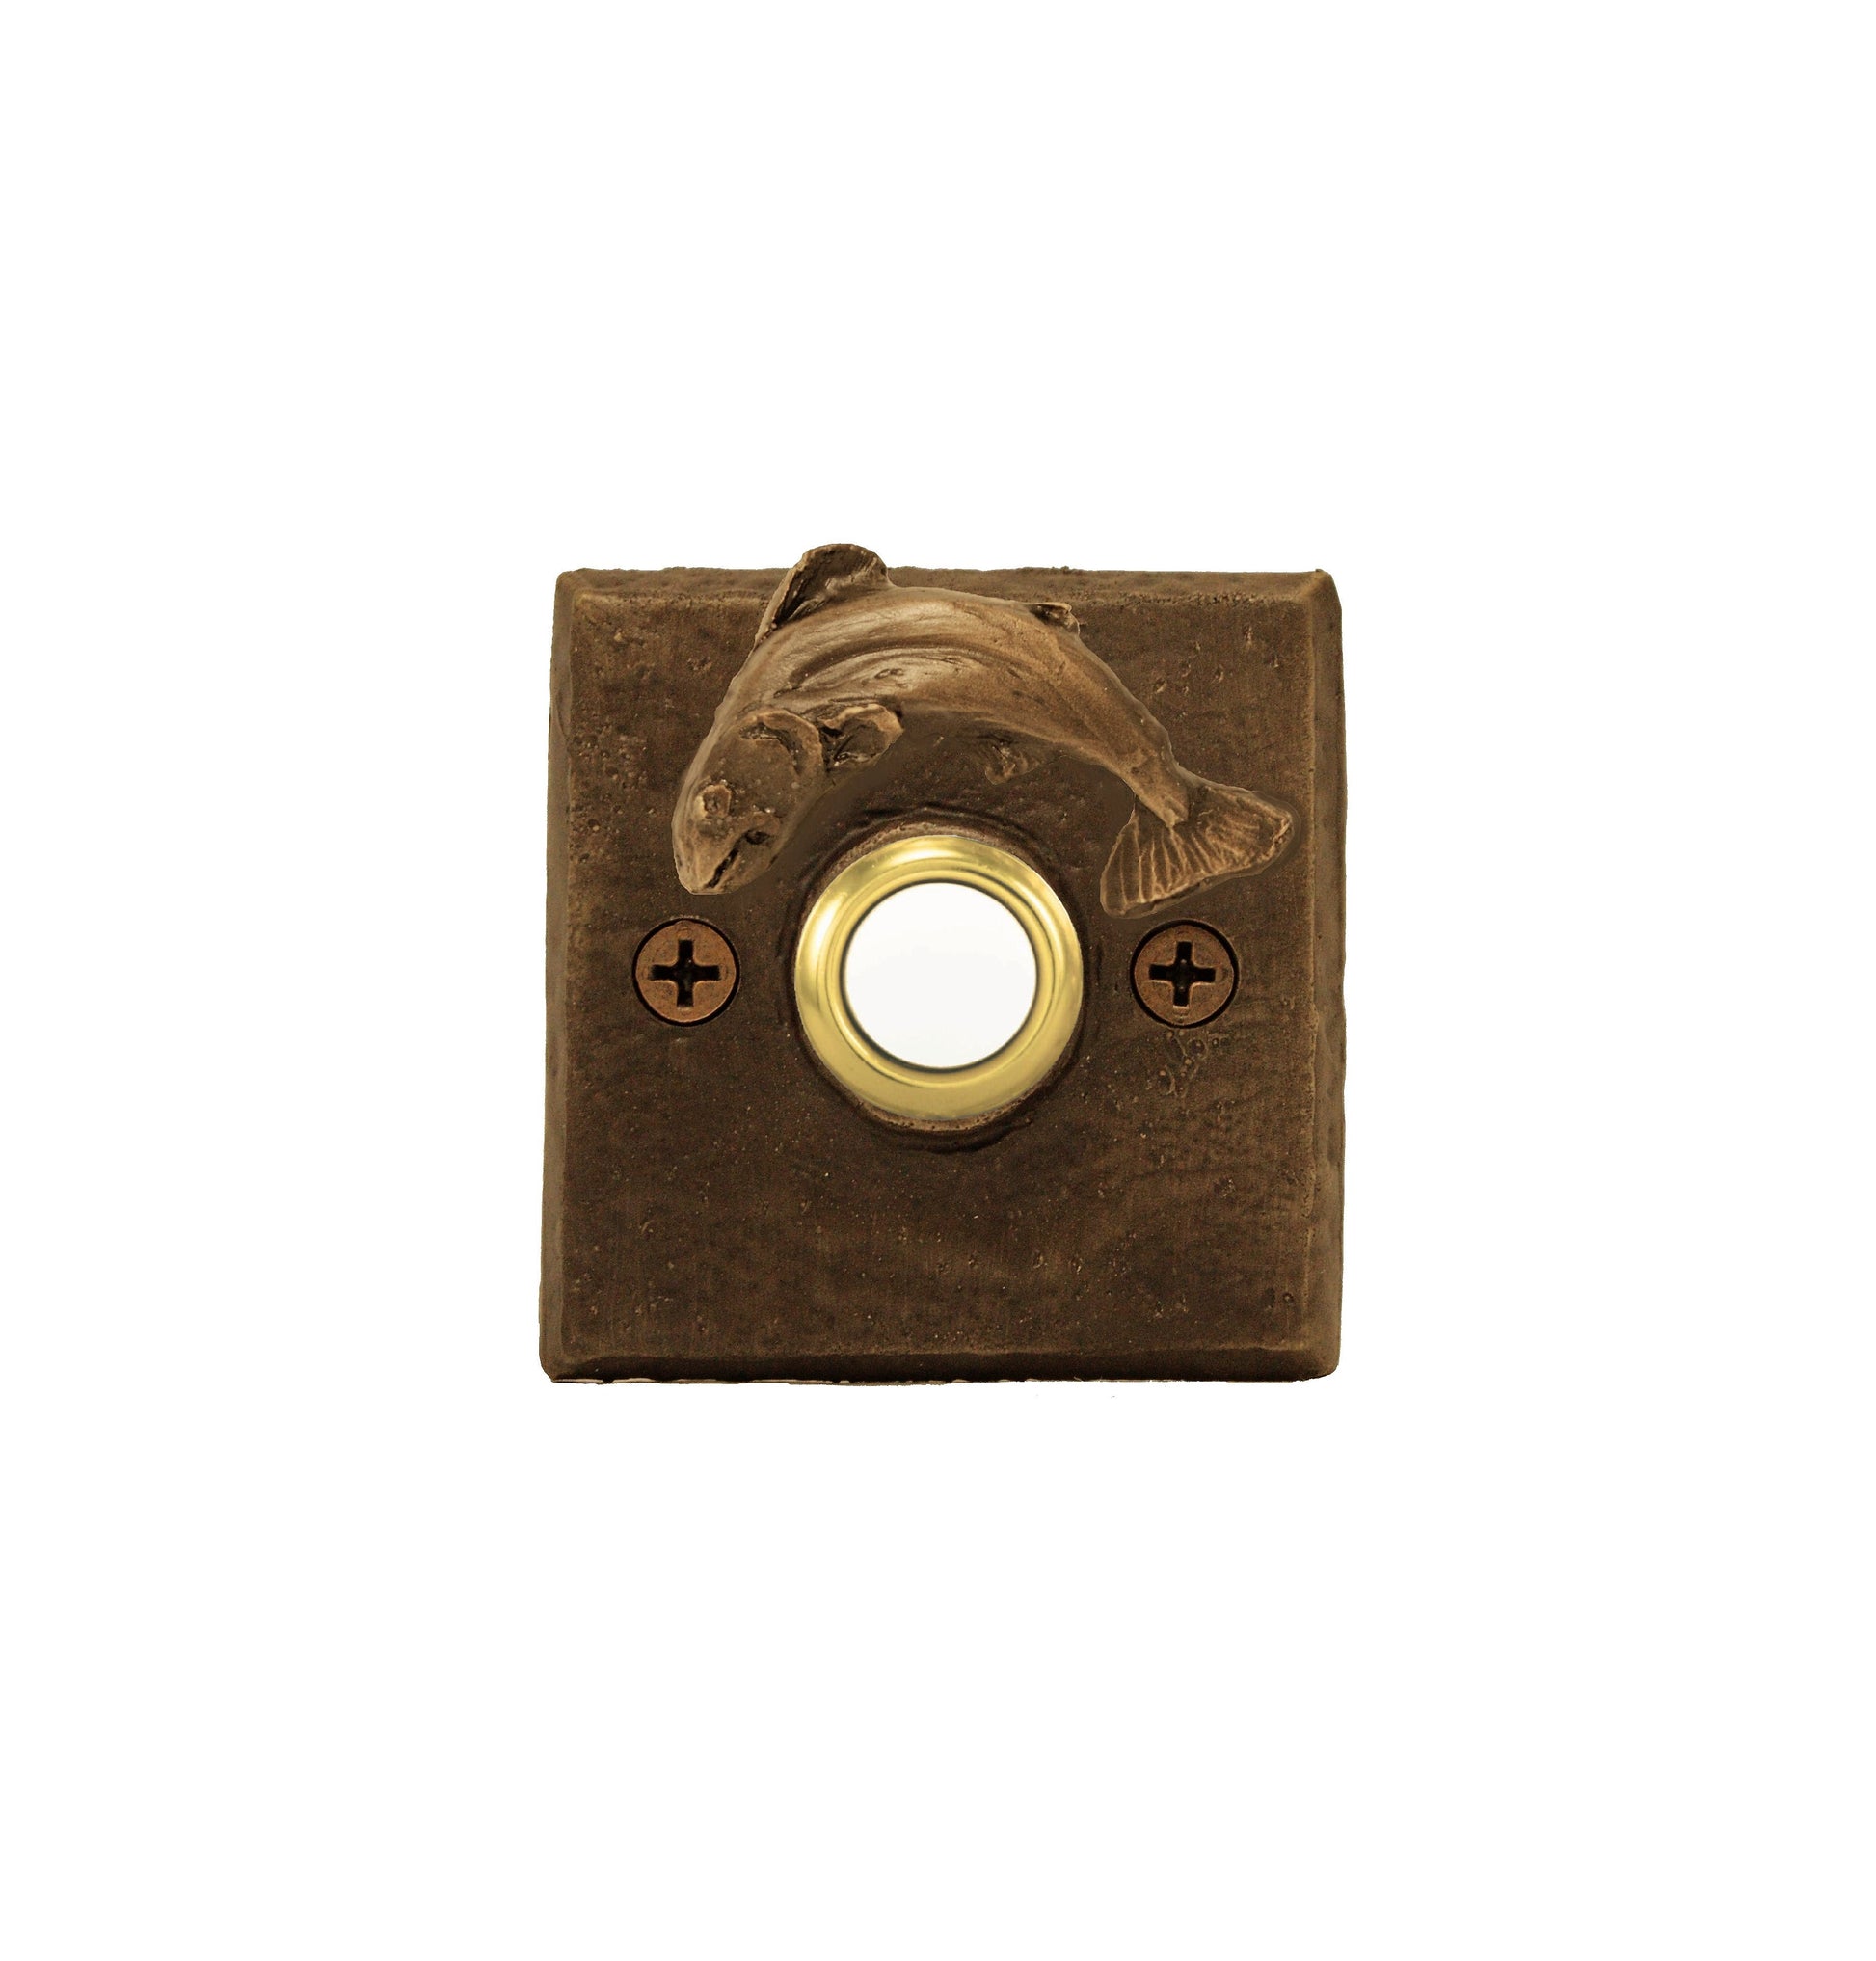 Square doorbell with trout - solid bronze - patina